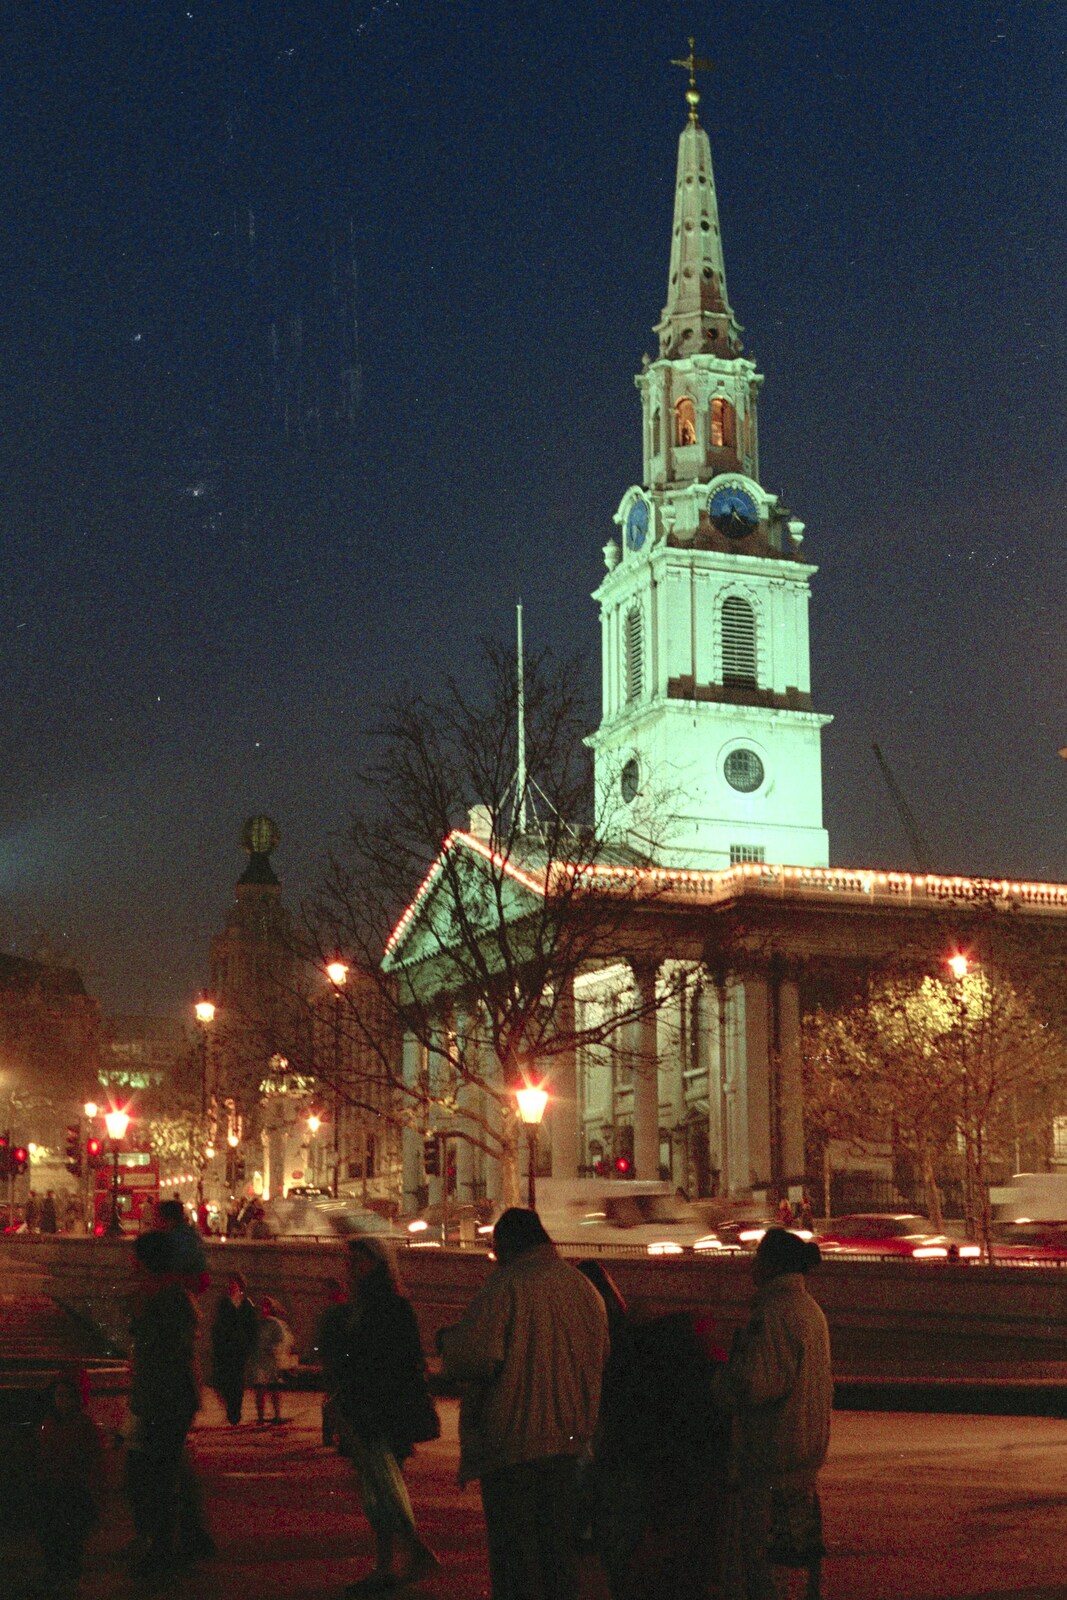 St. Martins, in Trafalgar Square from Pre-Christmas Dinner and a Next-Door Do, Stuston, Suffolk - 20th December 1990